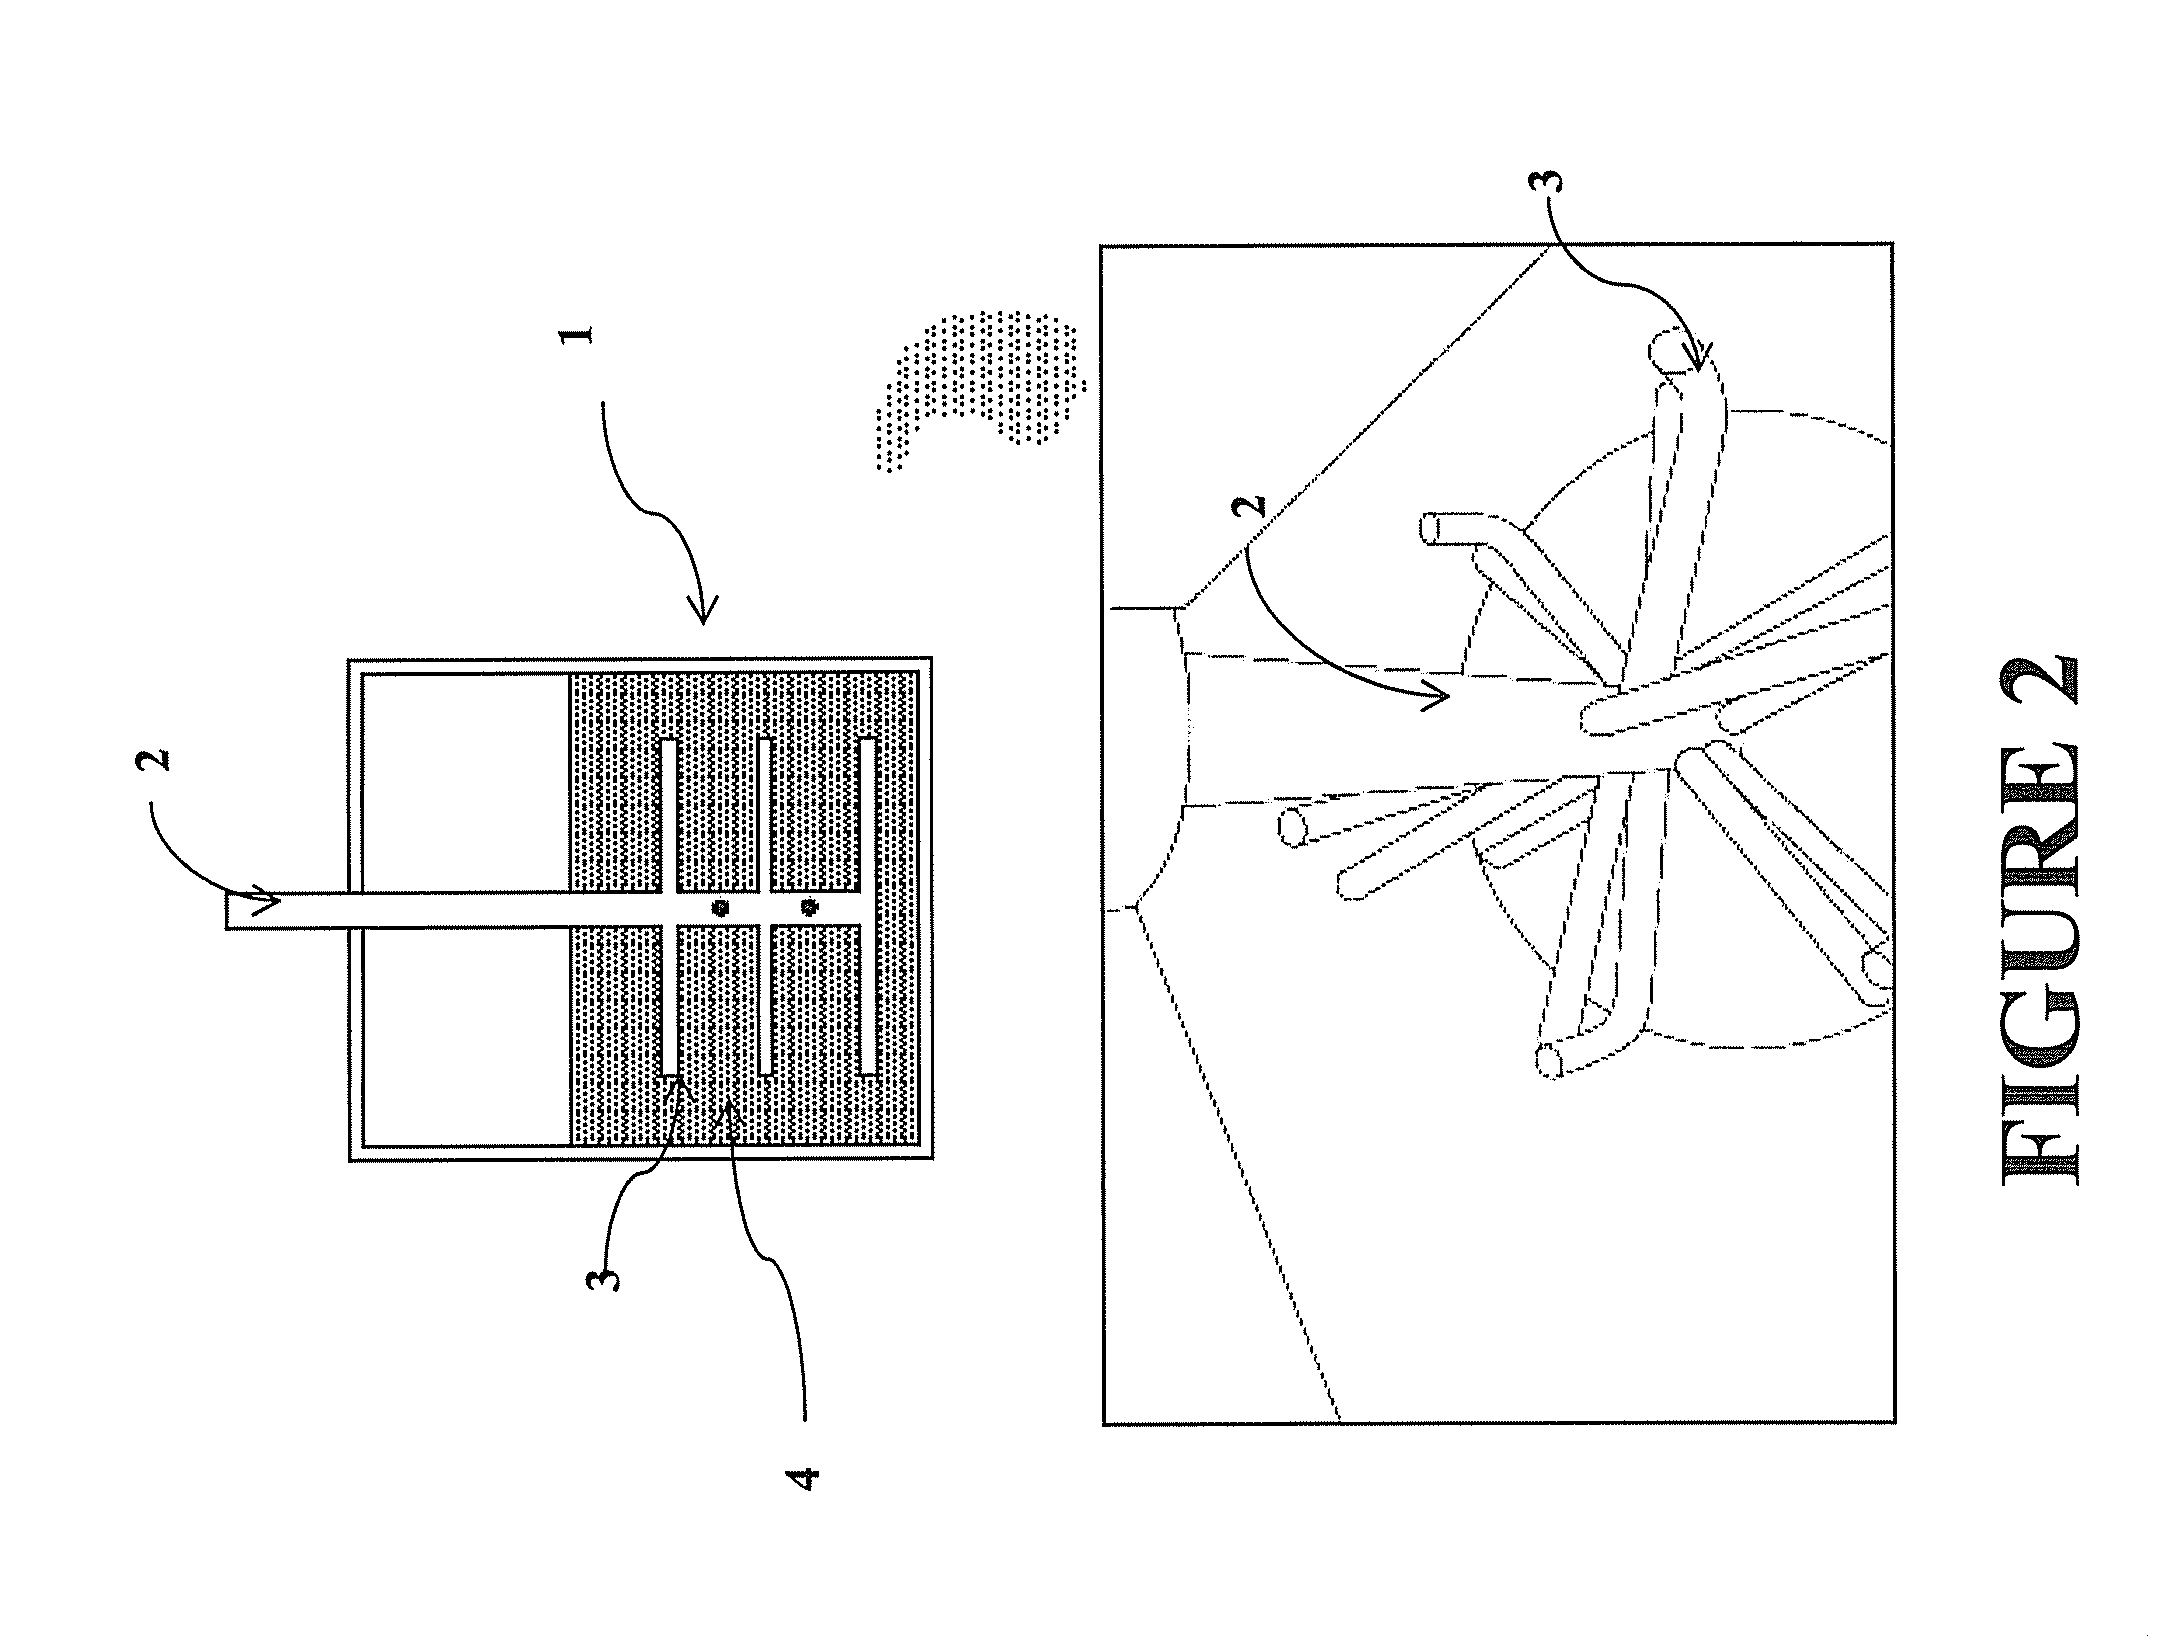 System and method for manufacturing asphalt products with recycled asphalt shingles